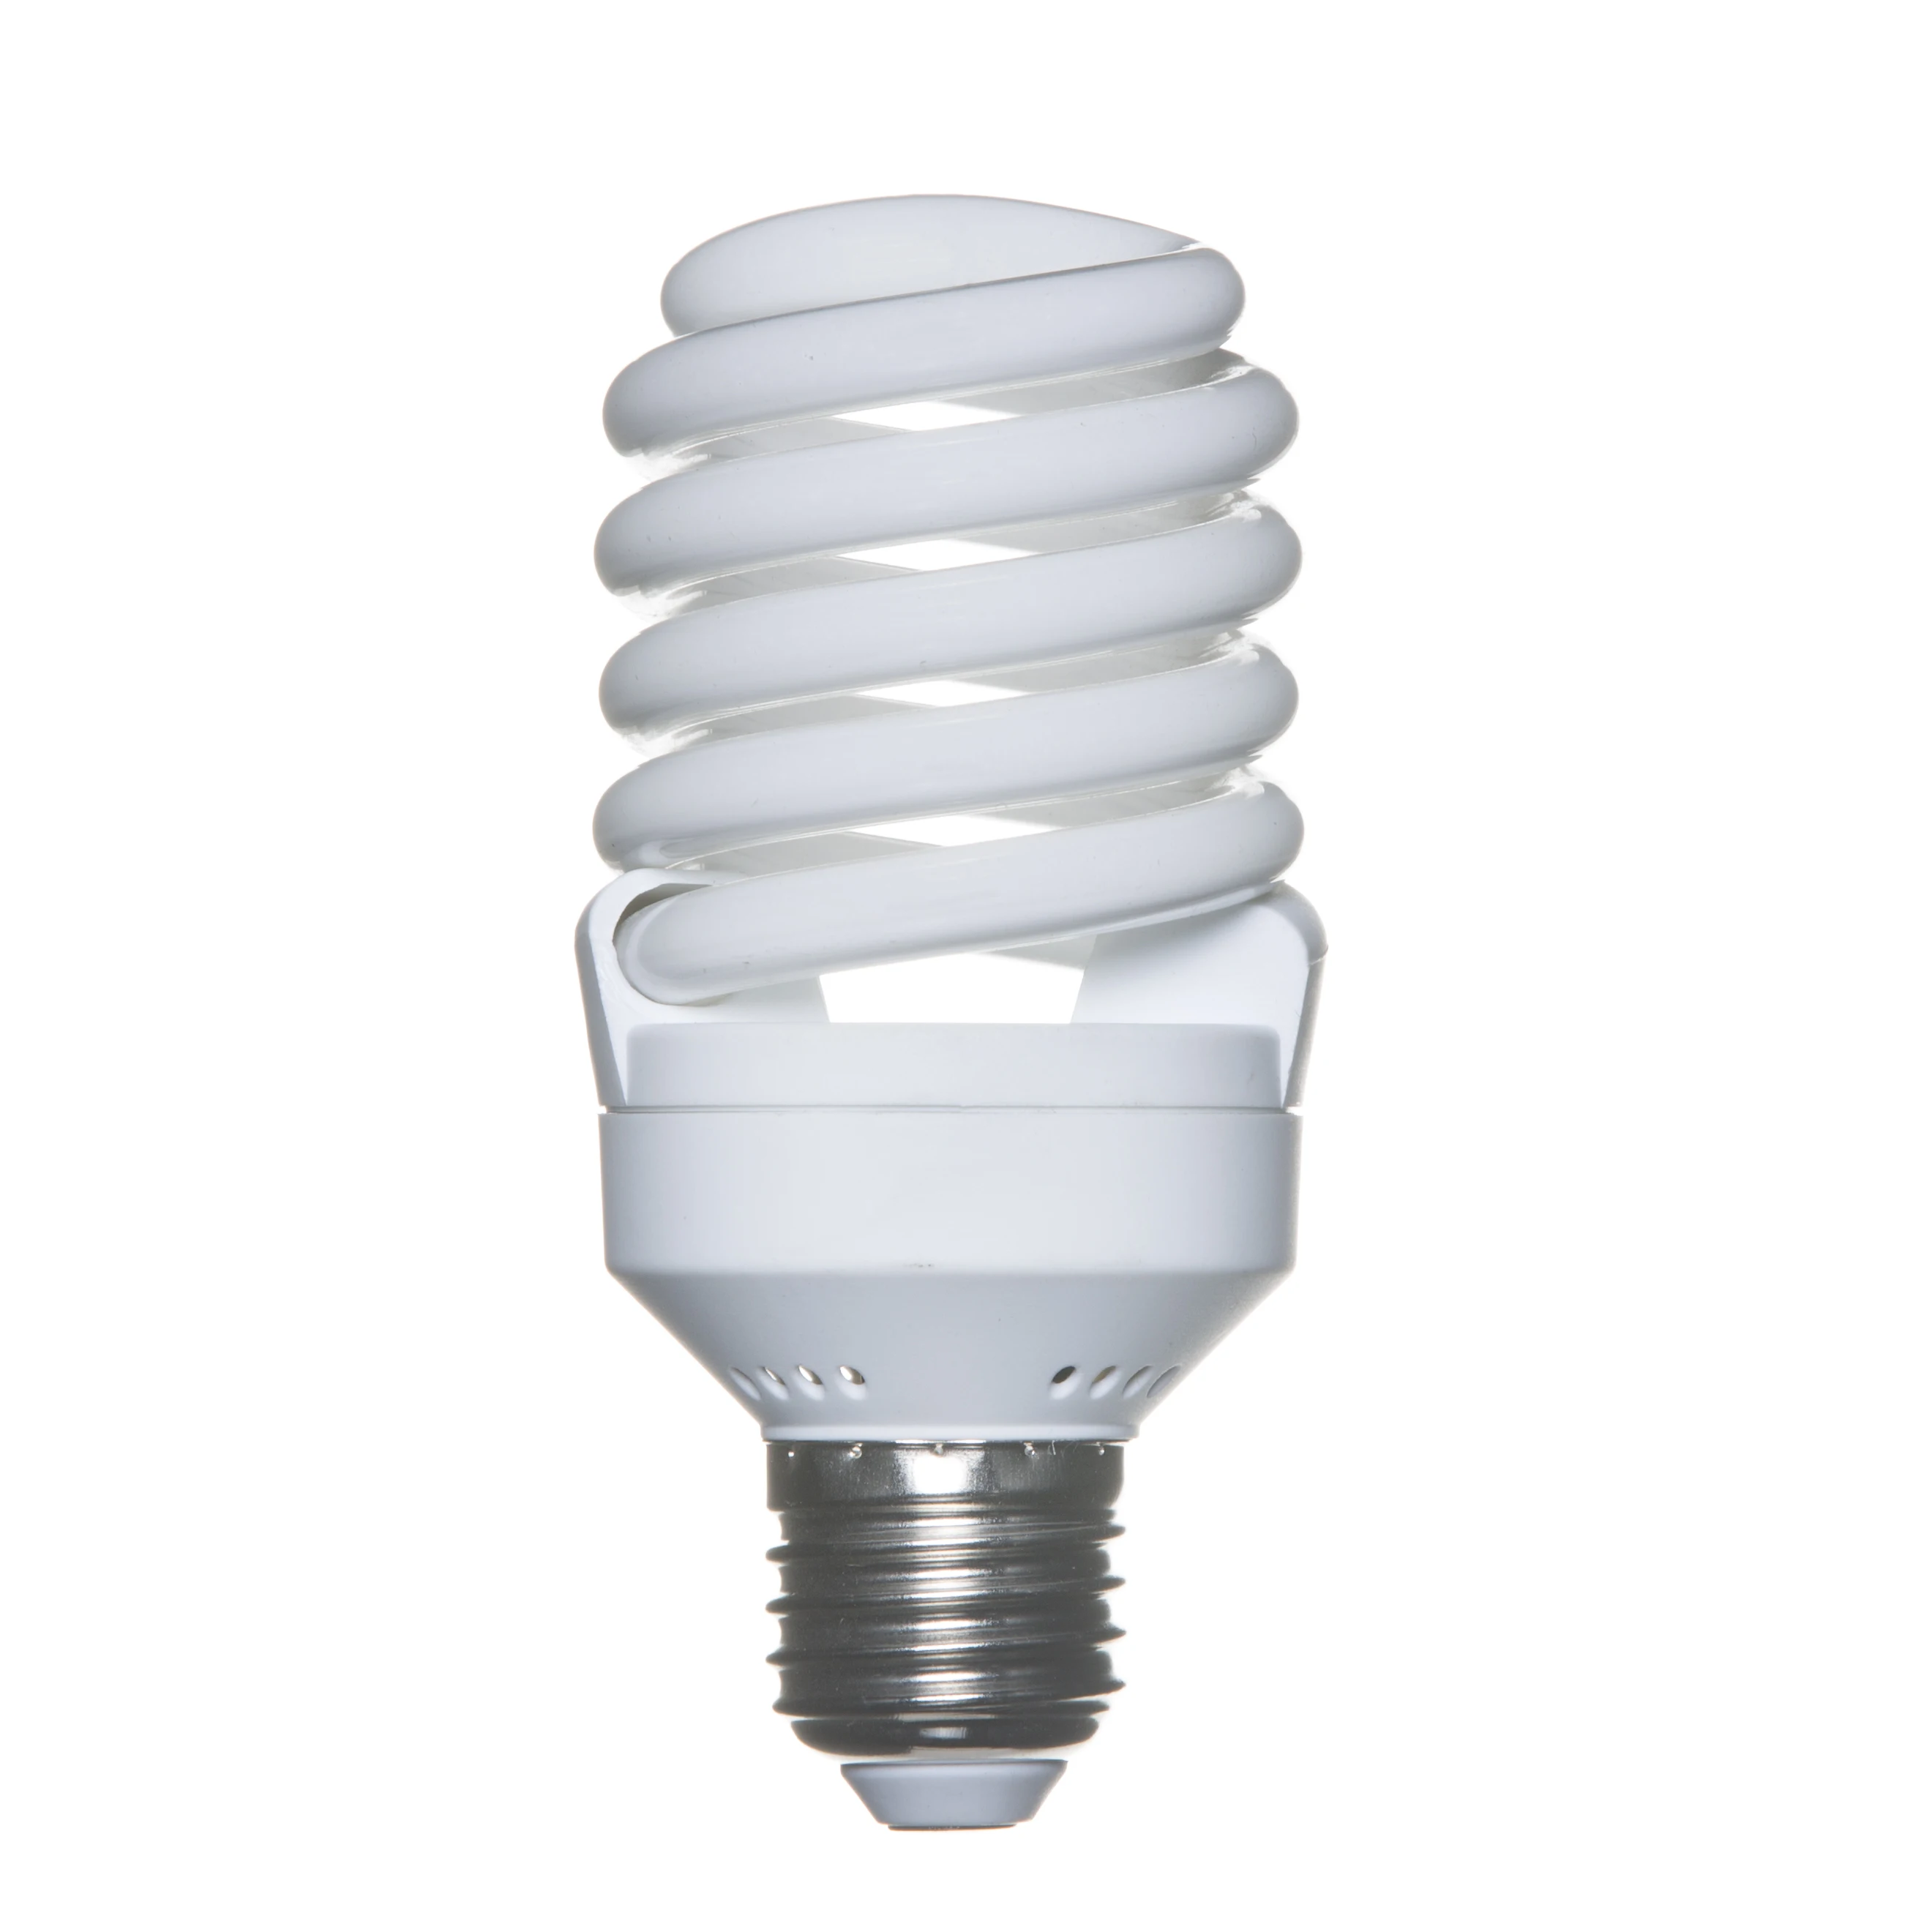 Cheap Price 120V E26 Twist  Espiral  25W energy saving lamp fluorescent bulb made in china